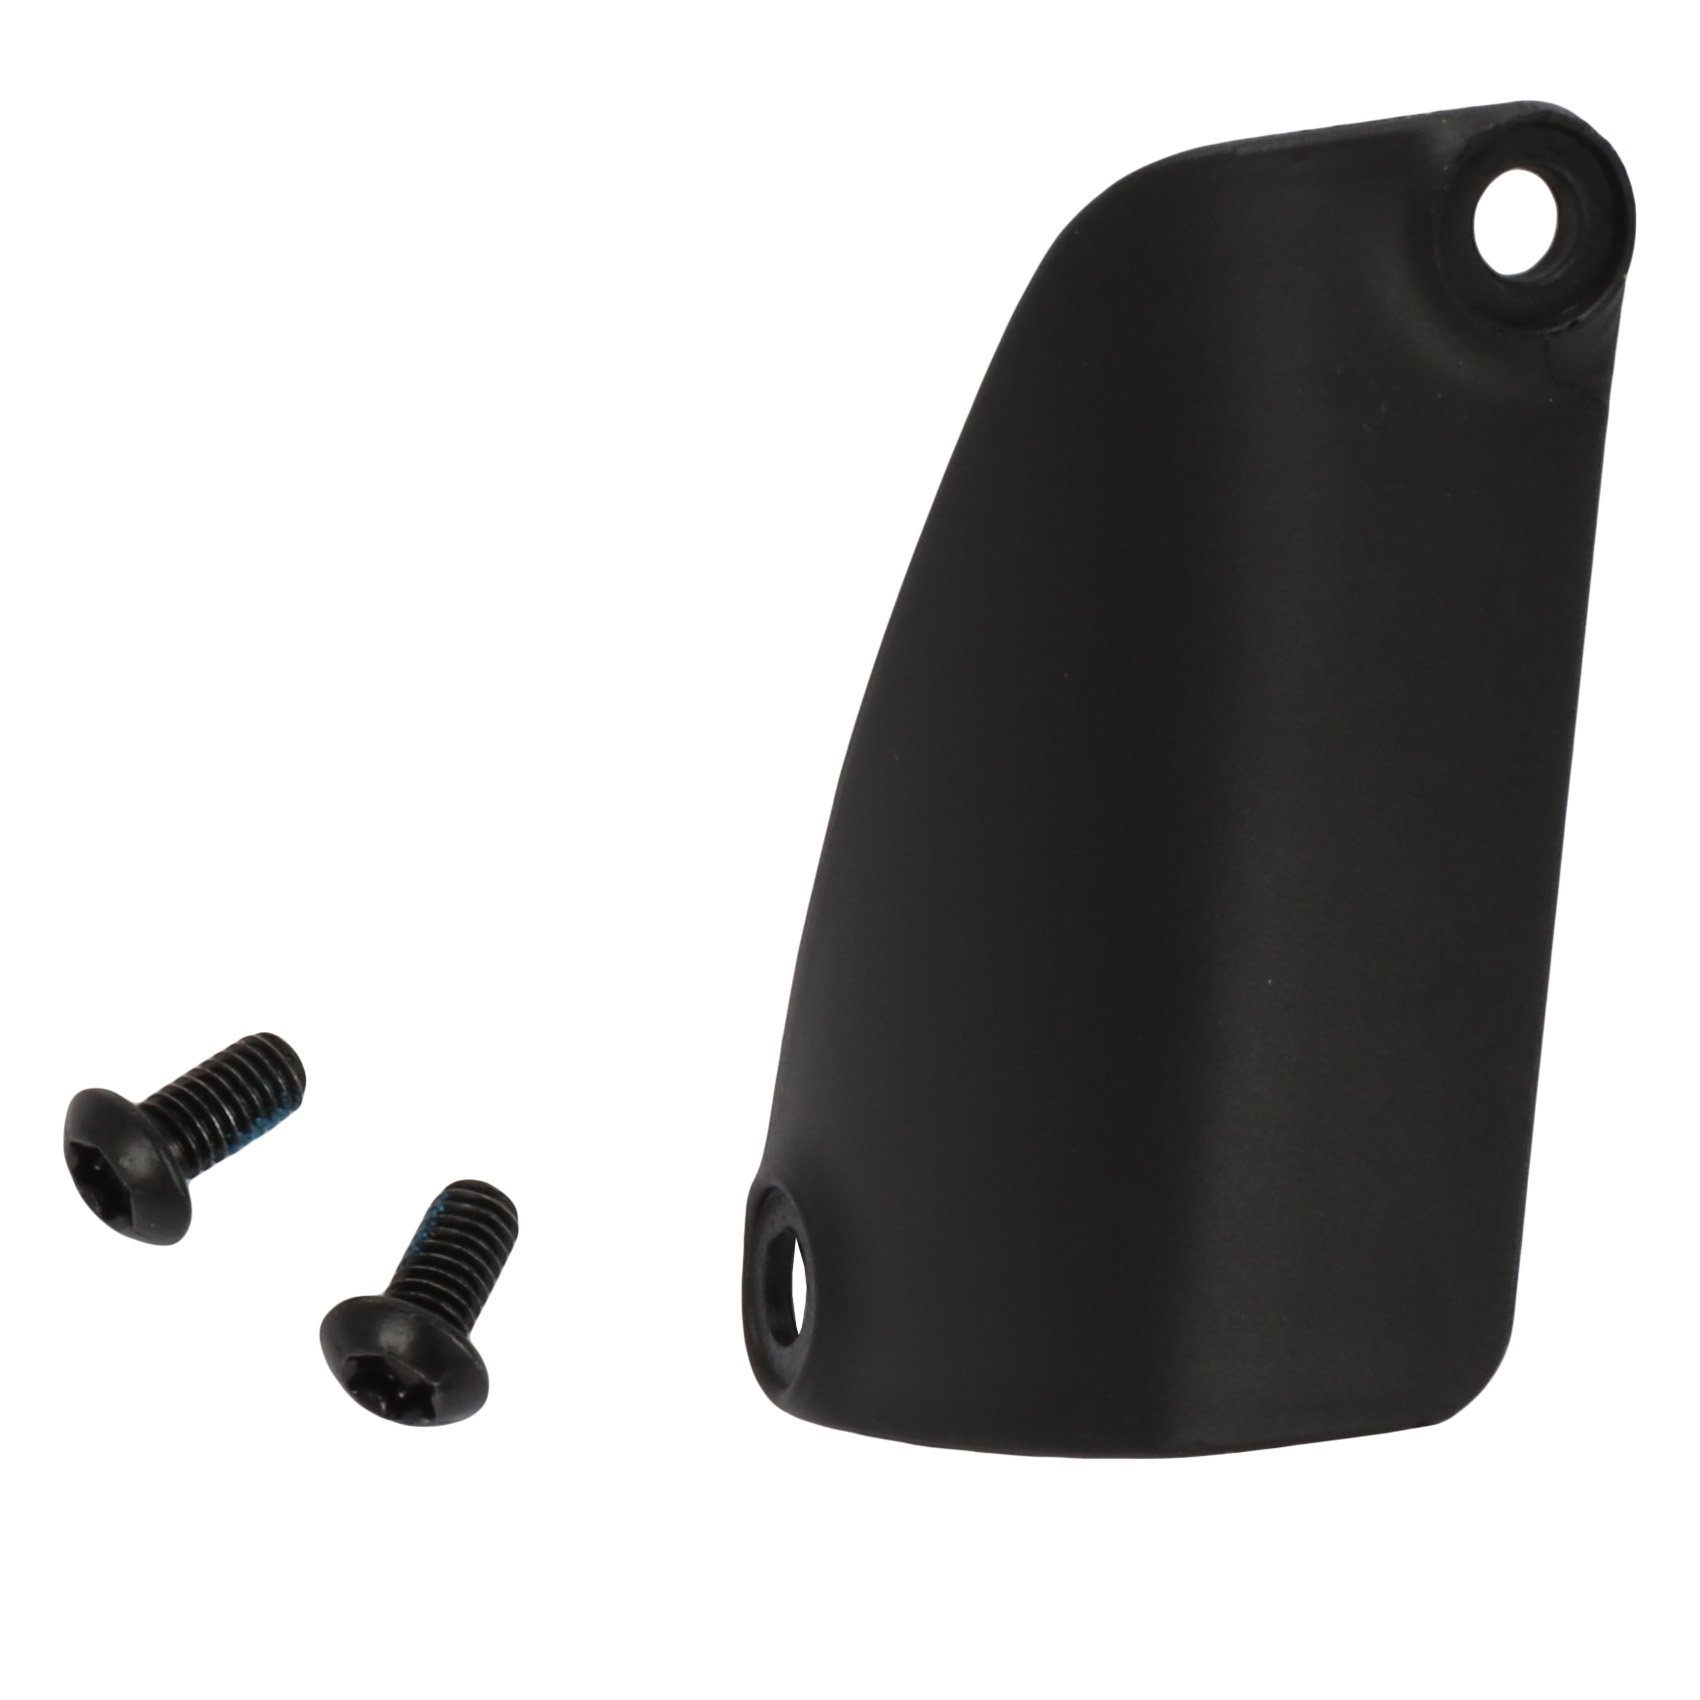 Picture of BMC Front Derailleur Cover for Speedfox 01/02 &amp; Agonist 01/02 as from 2018 - 301195